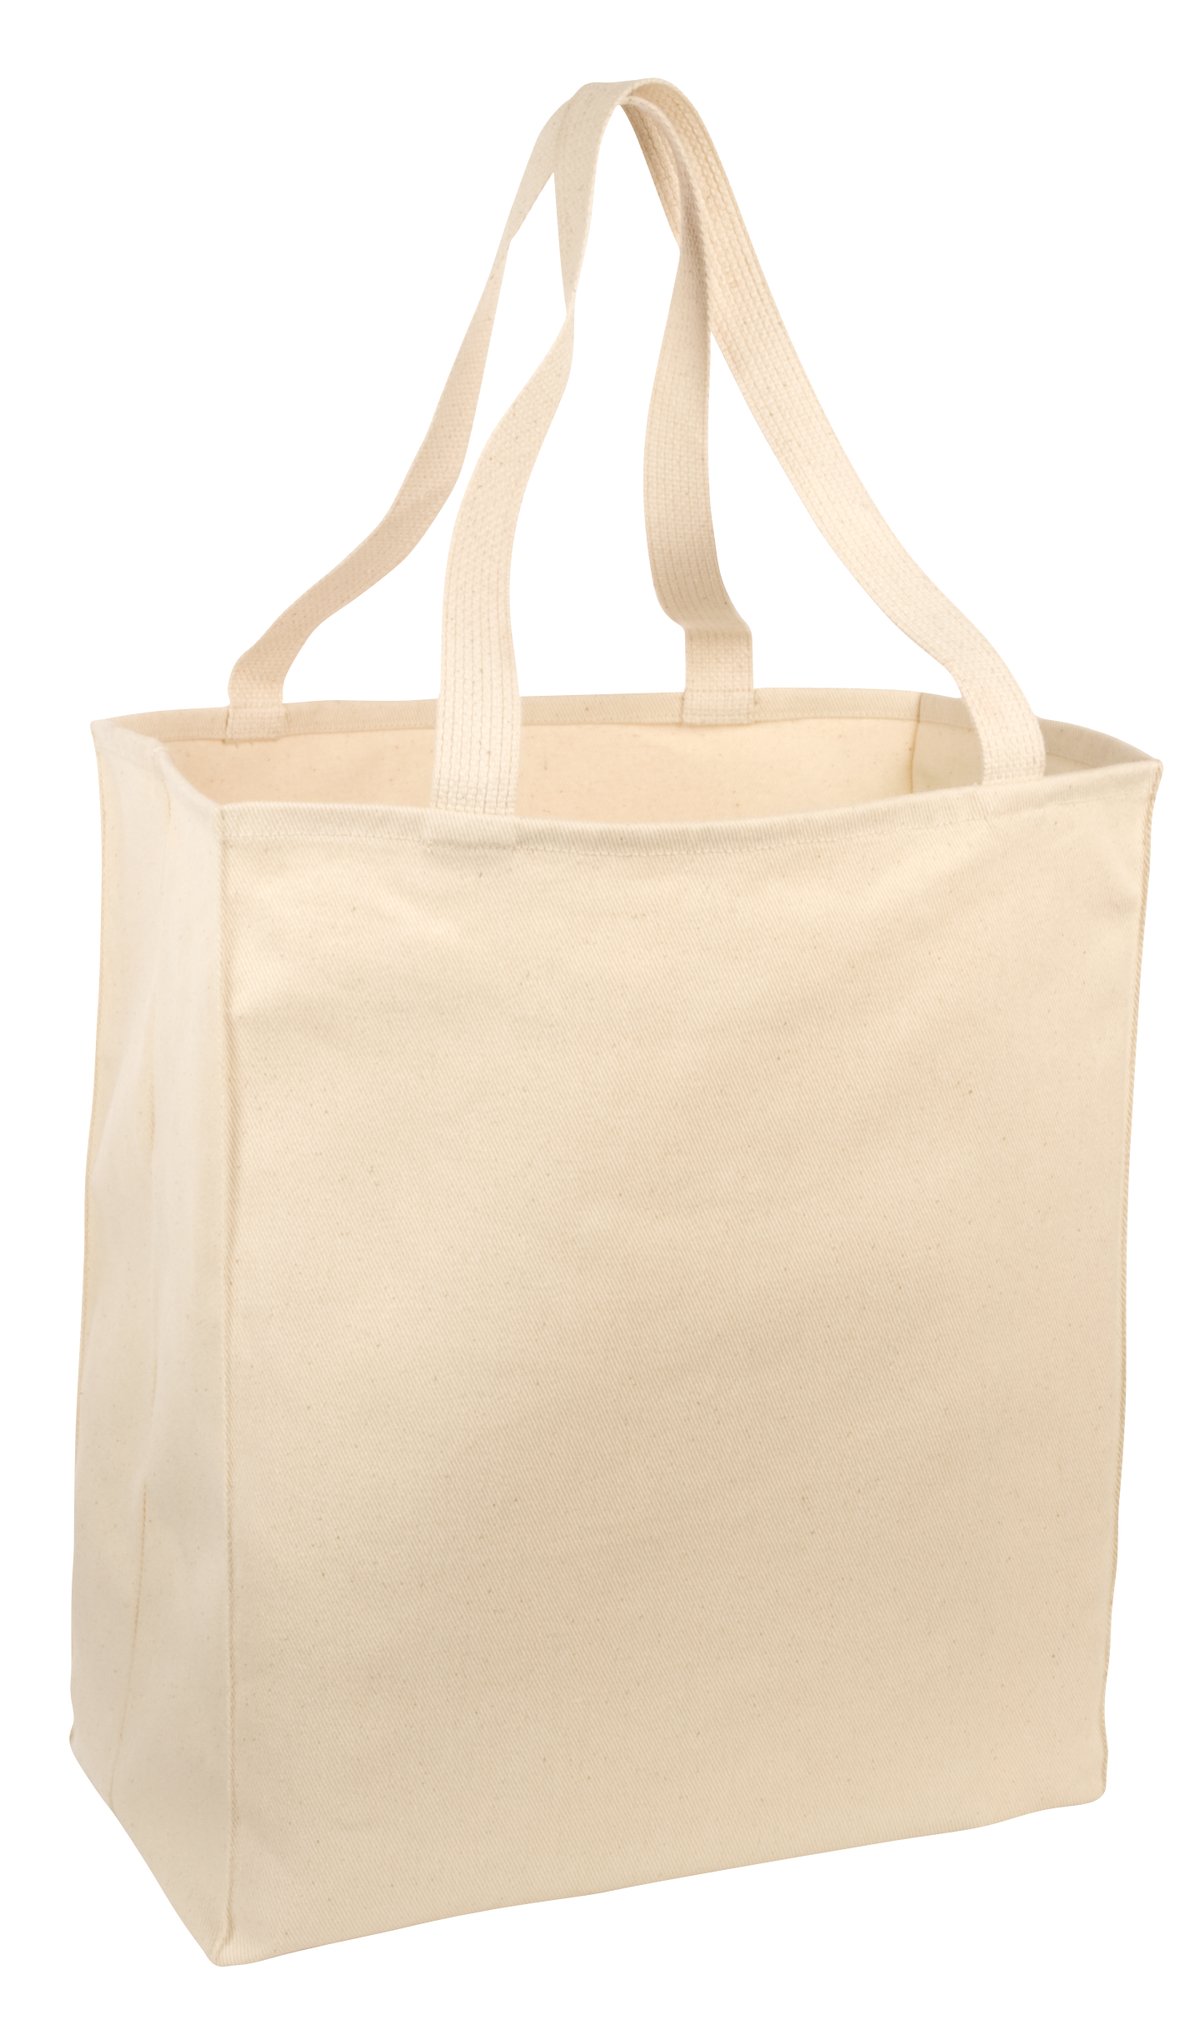 Port Authority Ideal Twill Over-the-Shoulder Grocery Tote. B110